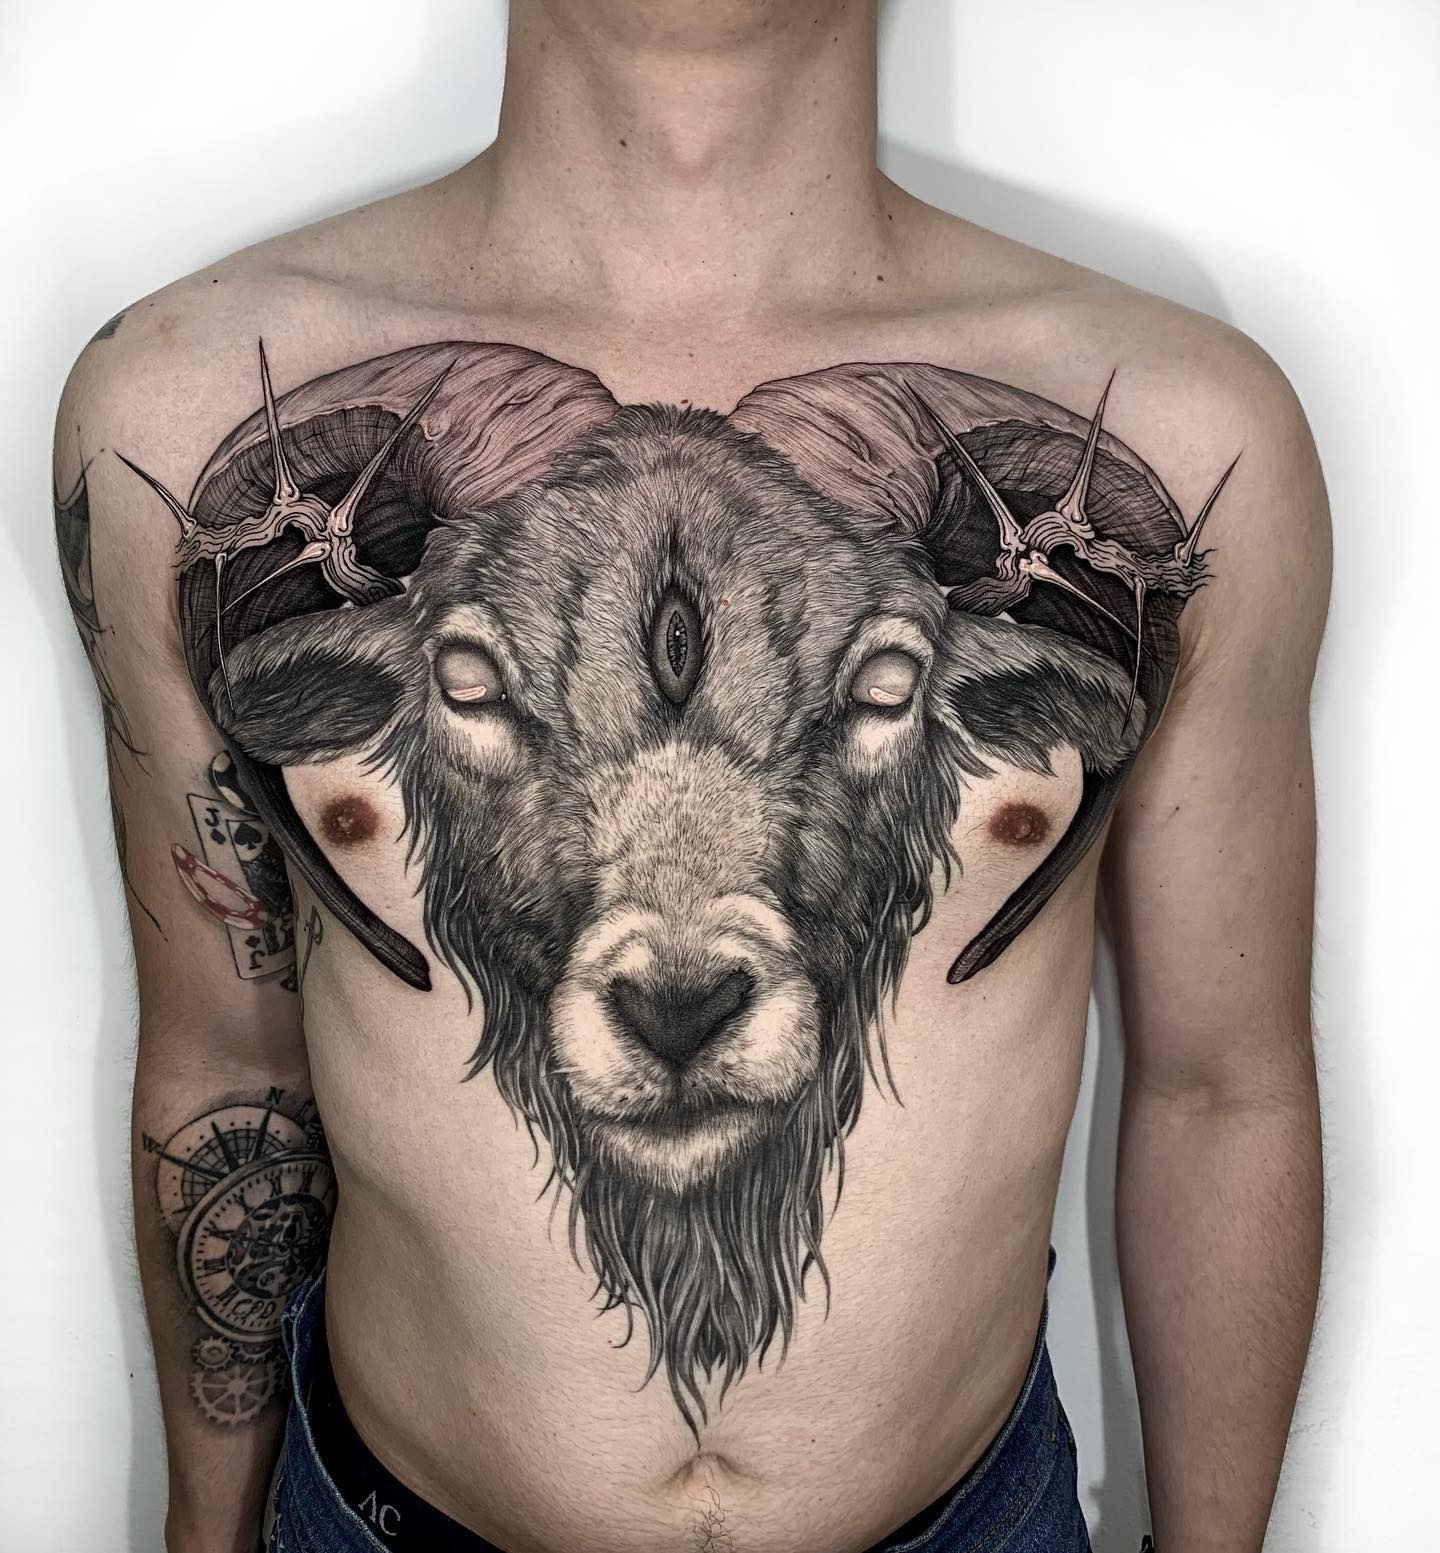 Awesome 3D Scary Satan Tattoo On Chest By James Tattooart